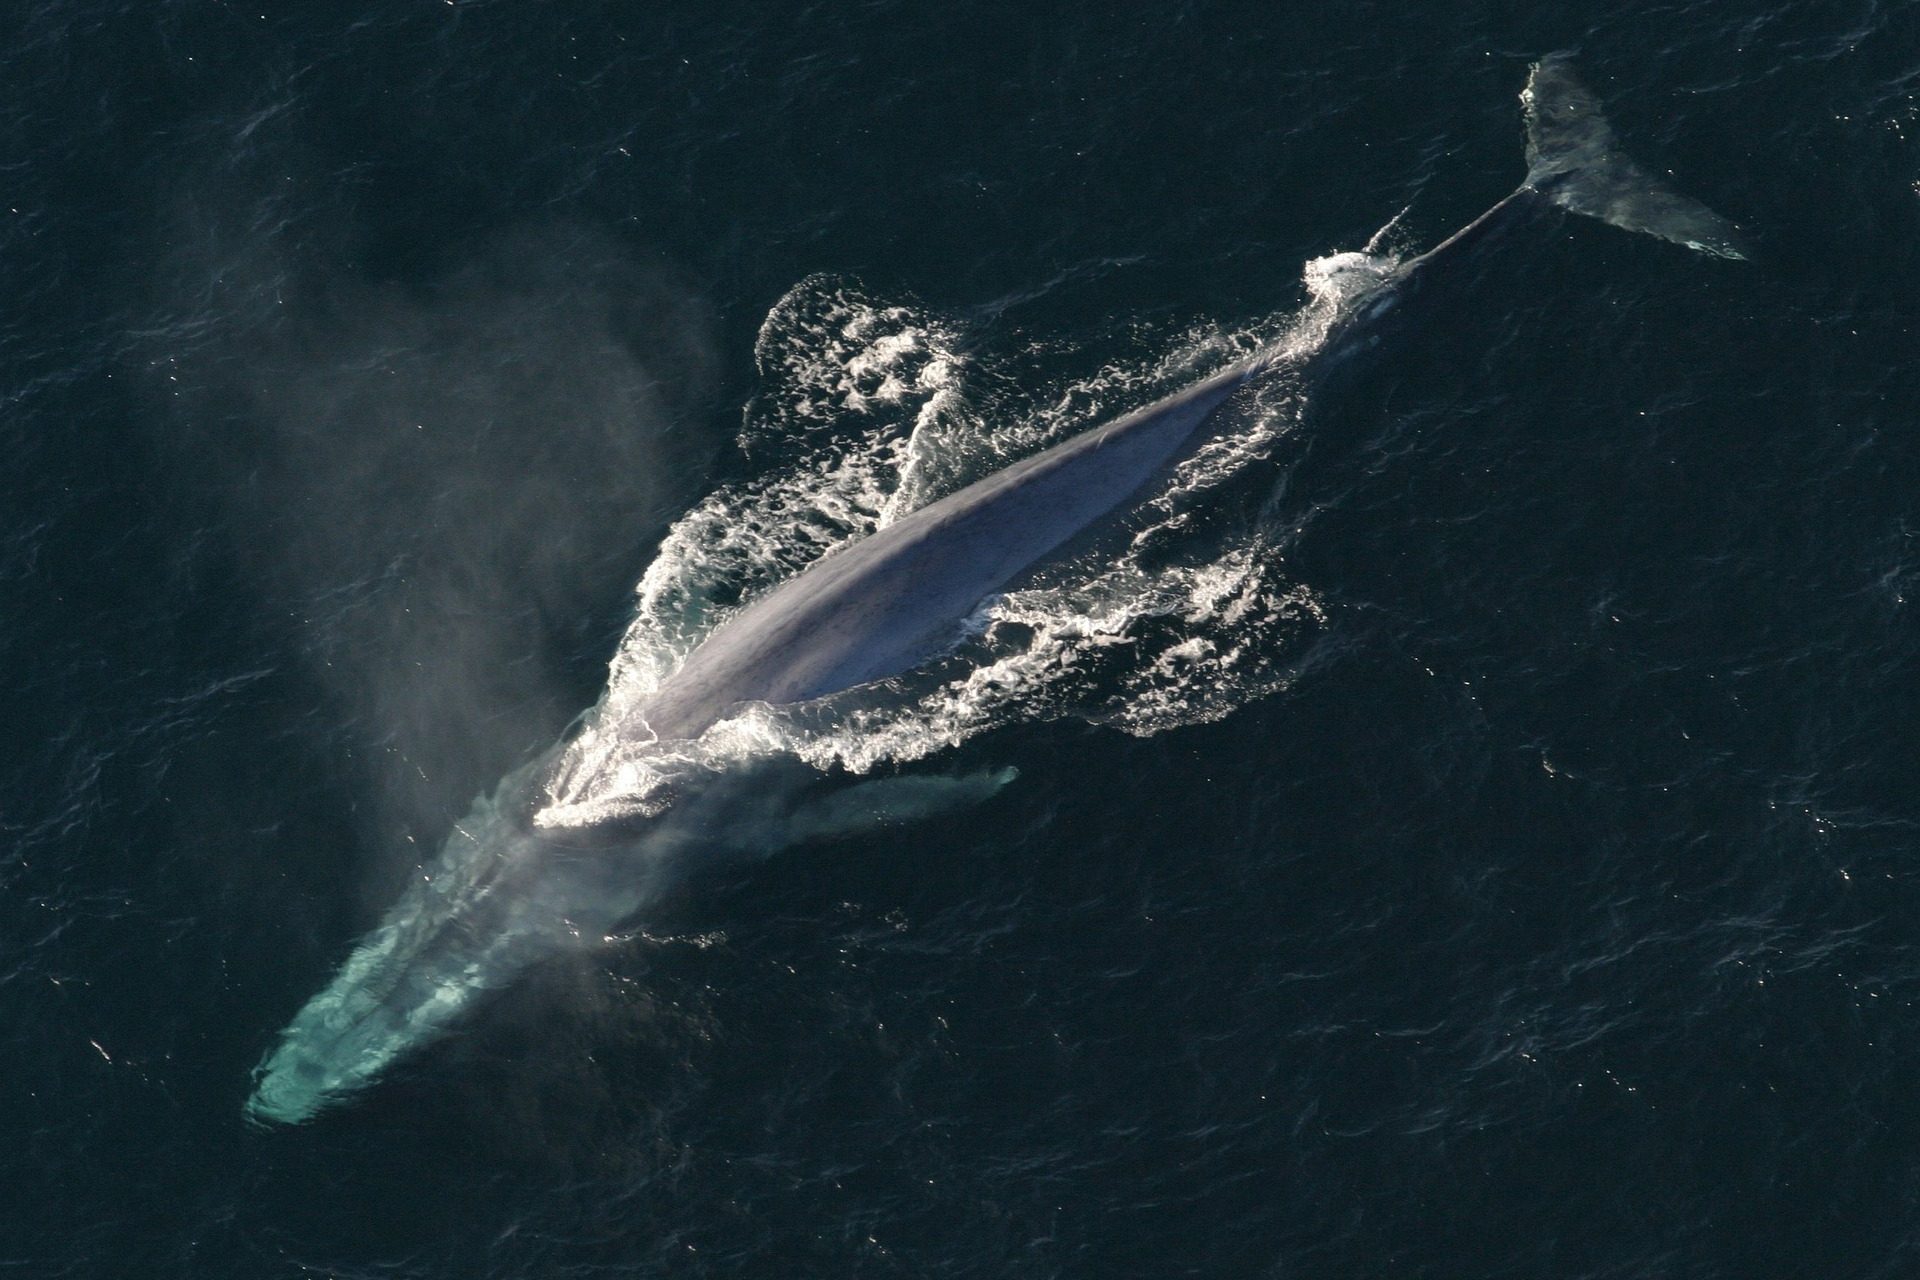 Where can we find blue whales?